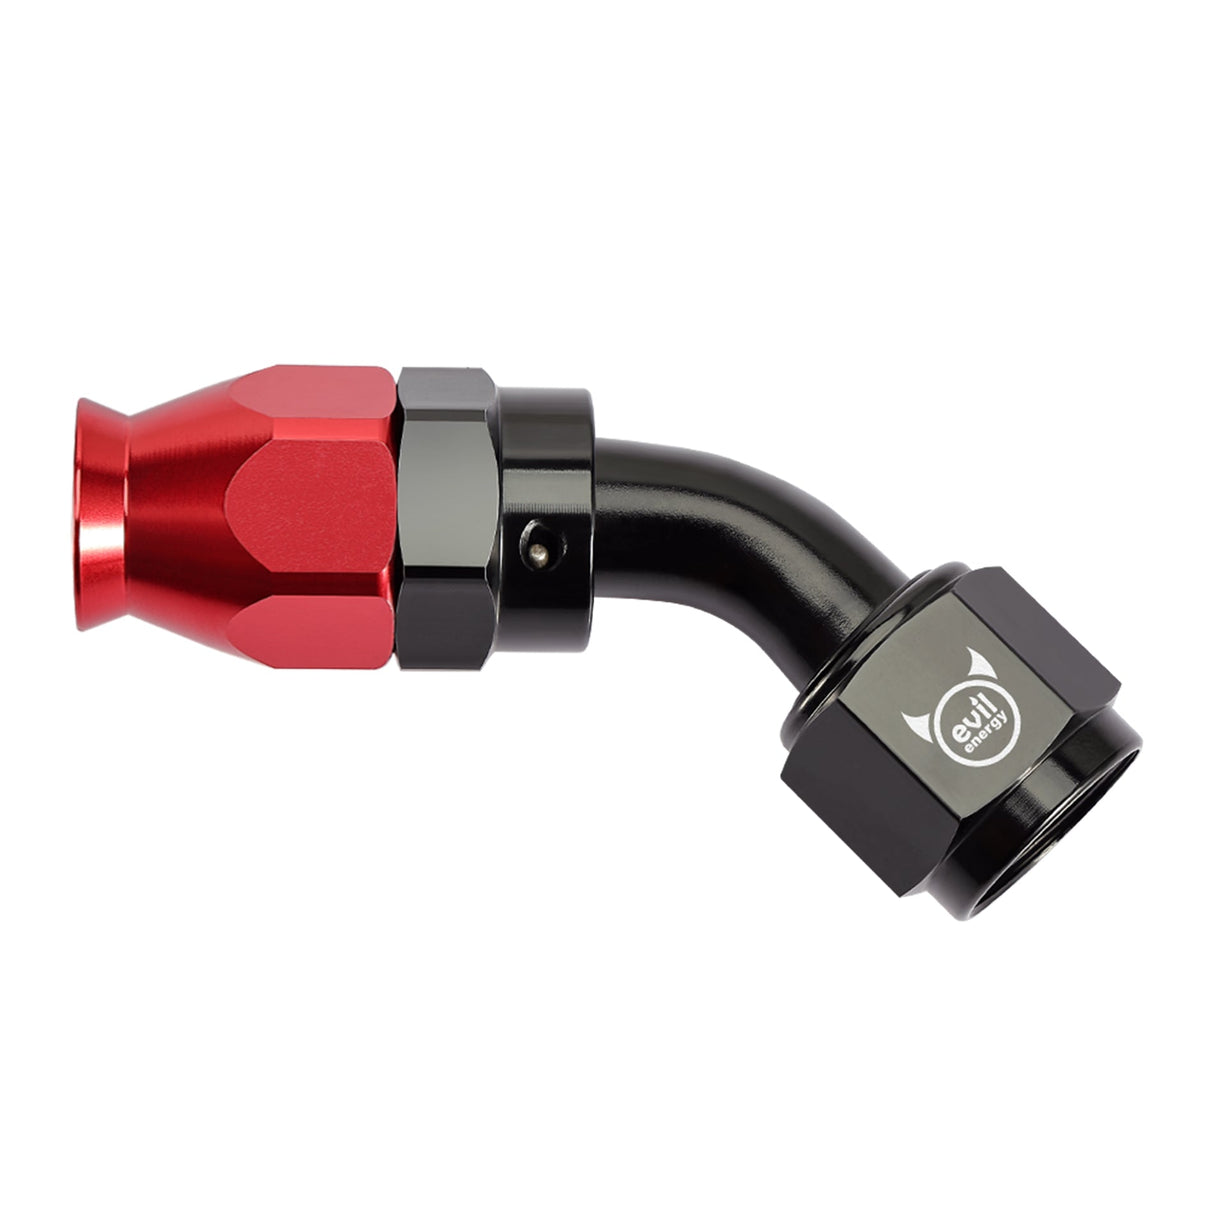 EVIL ENERGY PTFE Hose End Fitting Red&Black for PTFE Hose Only（4/6/8/10AN）